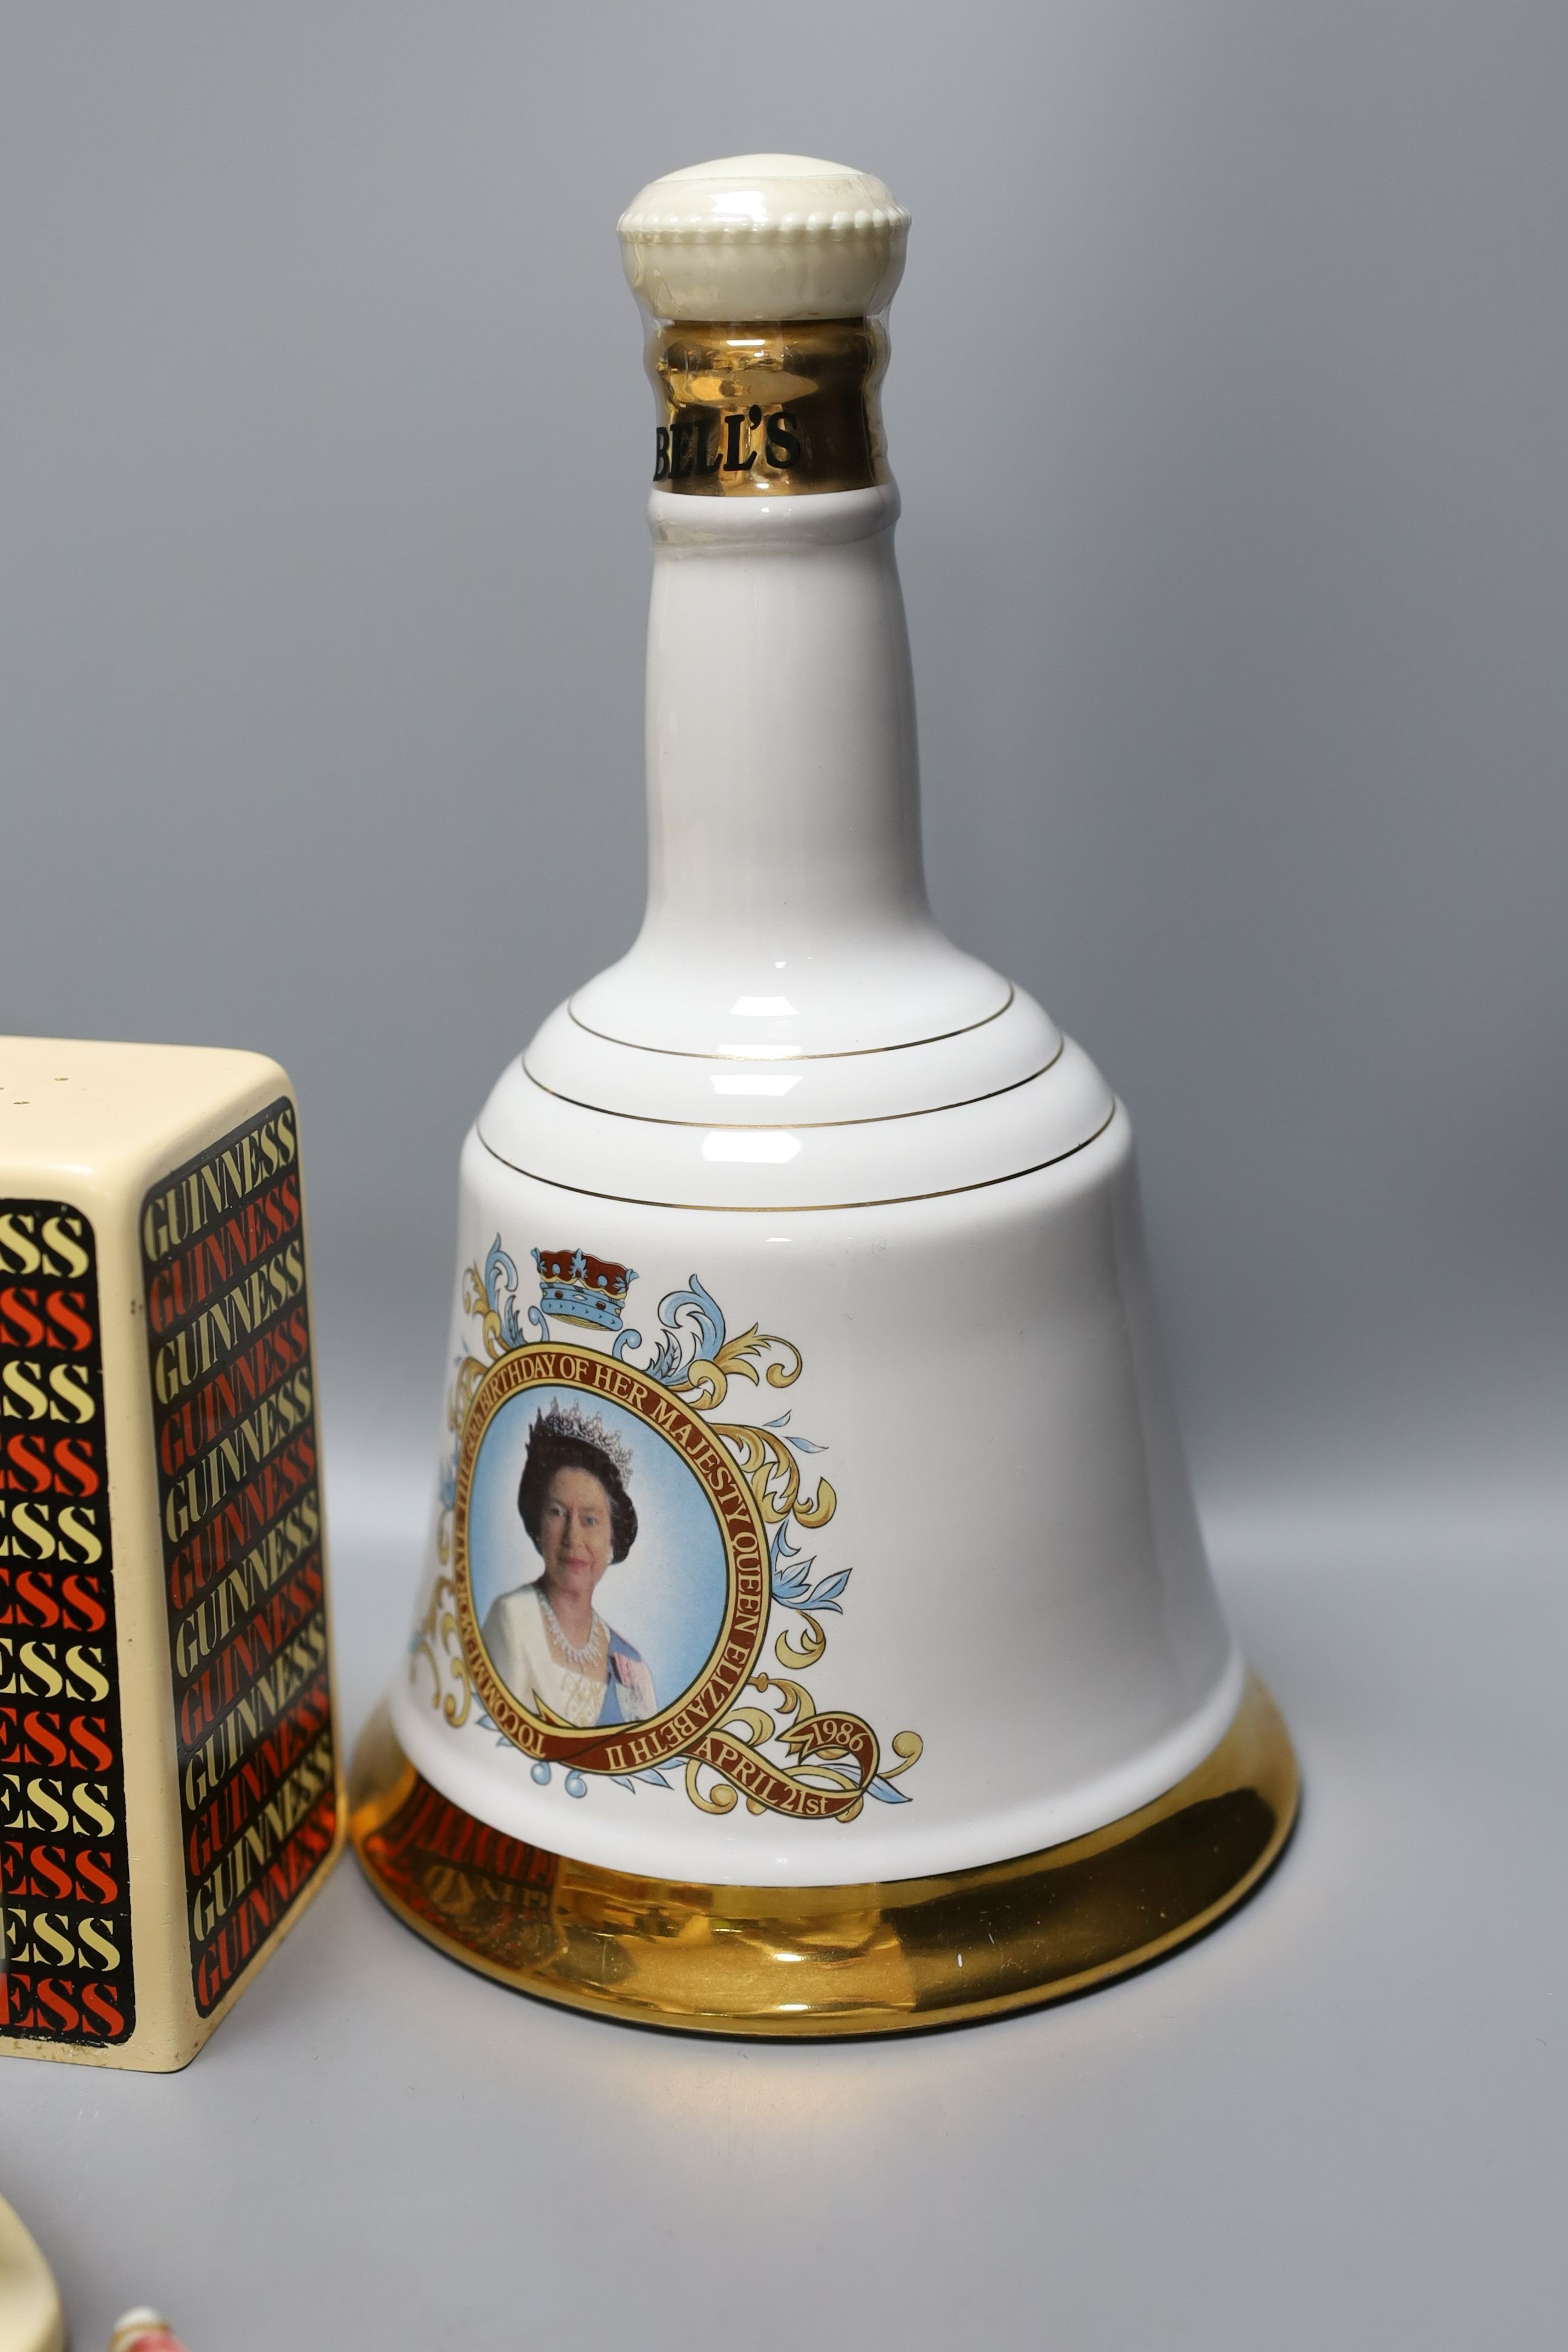 Assorted Guiness memorabilia, a Bells porcelain bottle of whisky, commemorative to the 60th birthday of Her Majesty Queen Elizabeth II